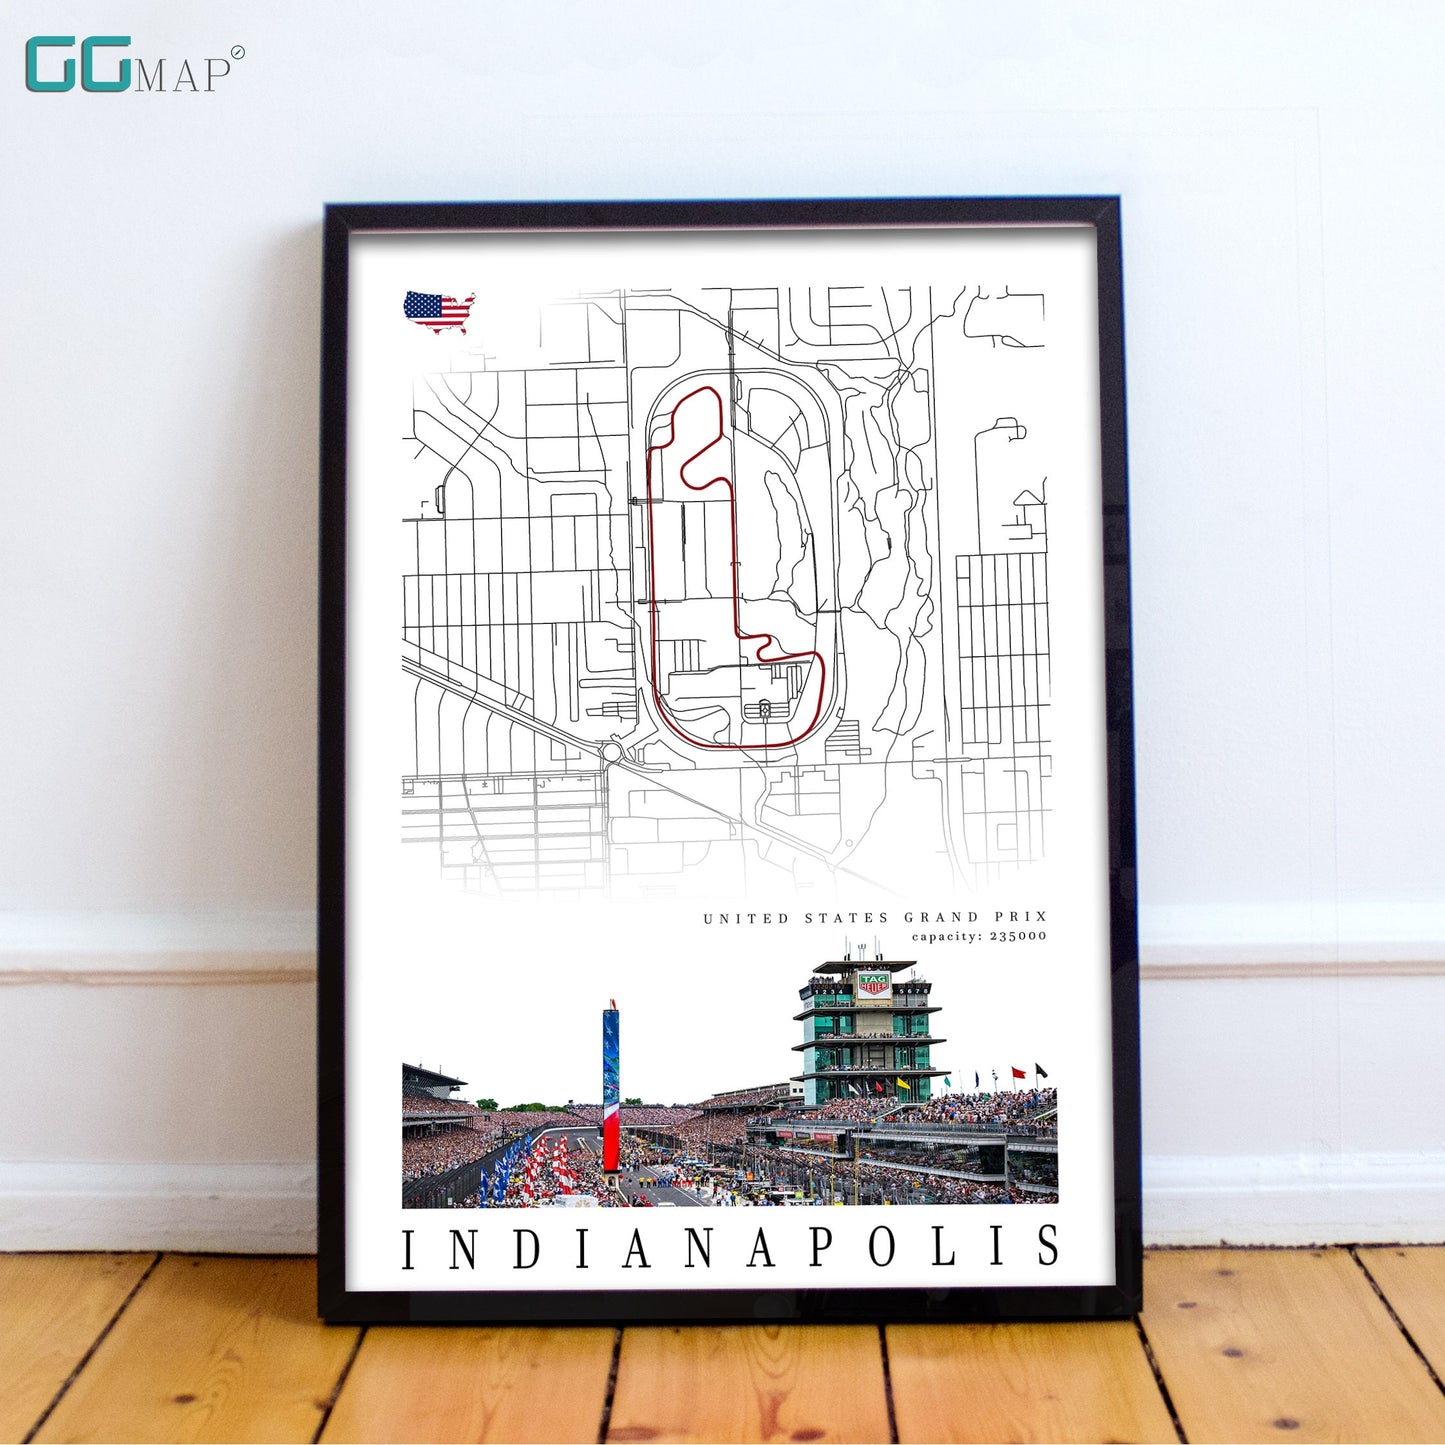 City map of INDIANAPOLIS - United States Grand Prix - Home Decor Indianapolis - Wall decor Indianapolis - Formula 1 gift - Printed map